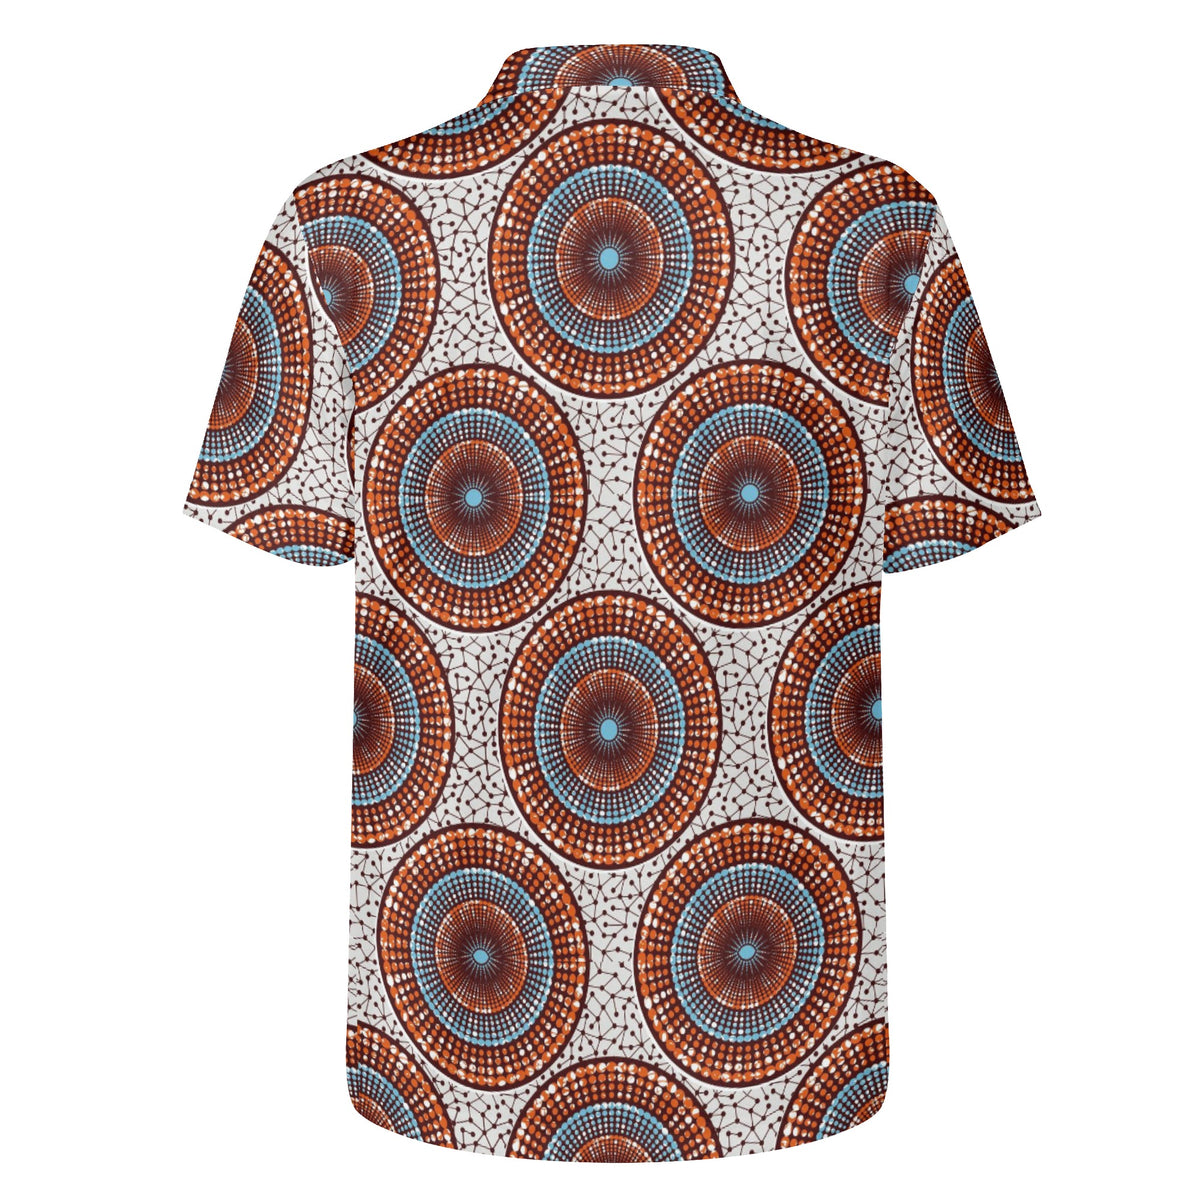 Dark Olive Green Polo Shirt with African Ankara prints in vibrant colors Sumbu_African_Prints_and_Designs